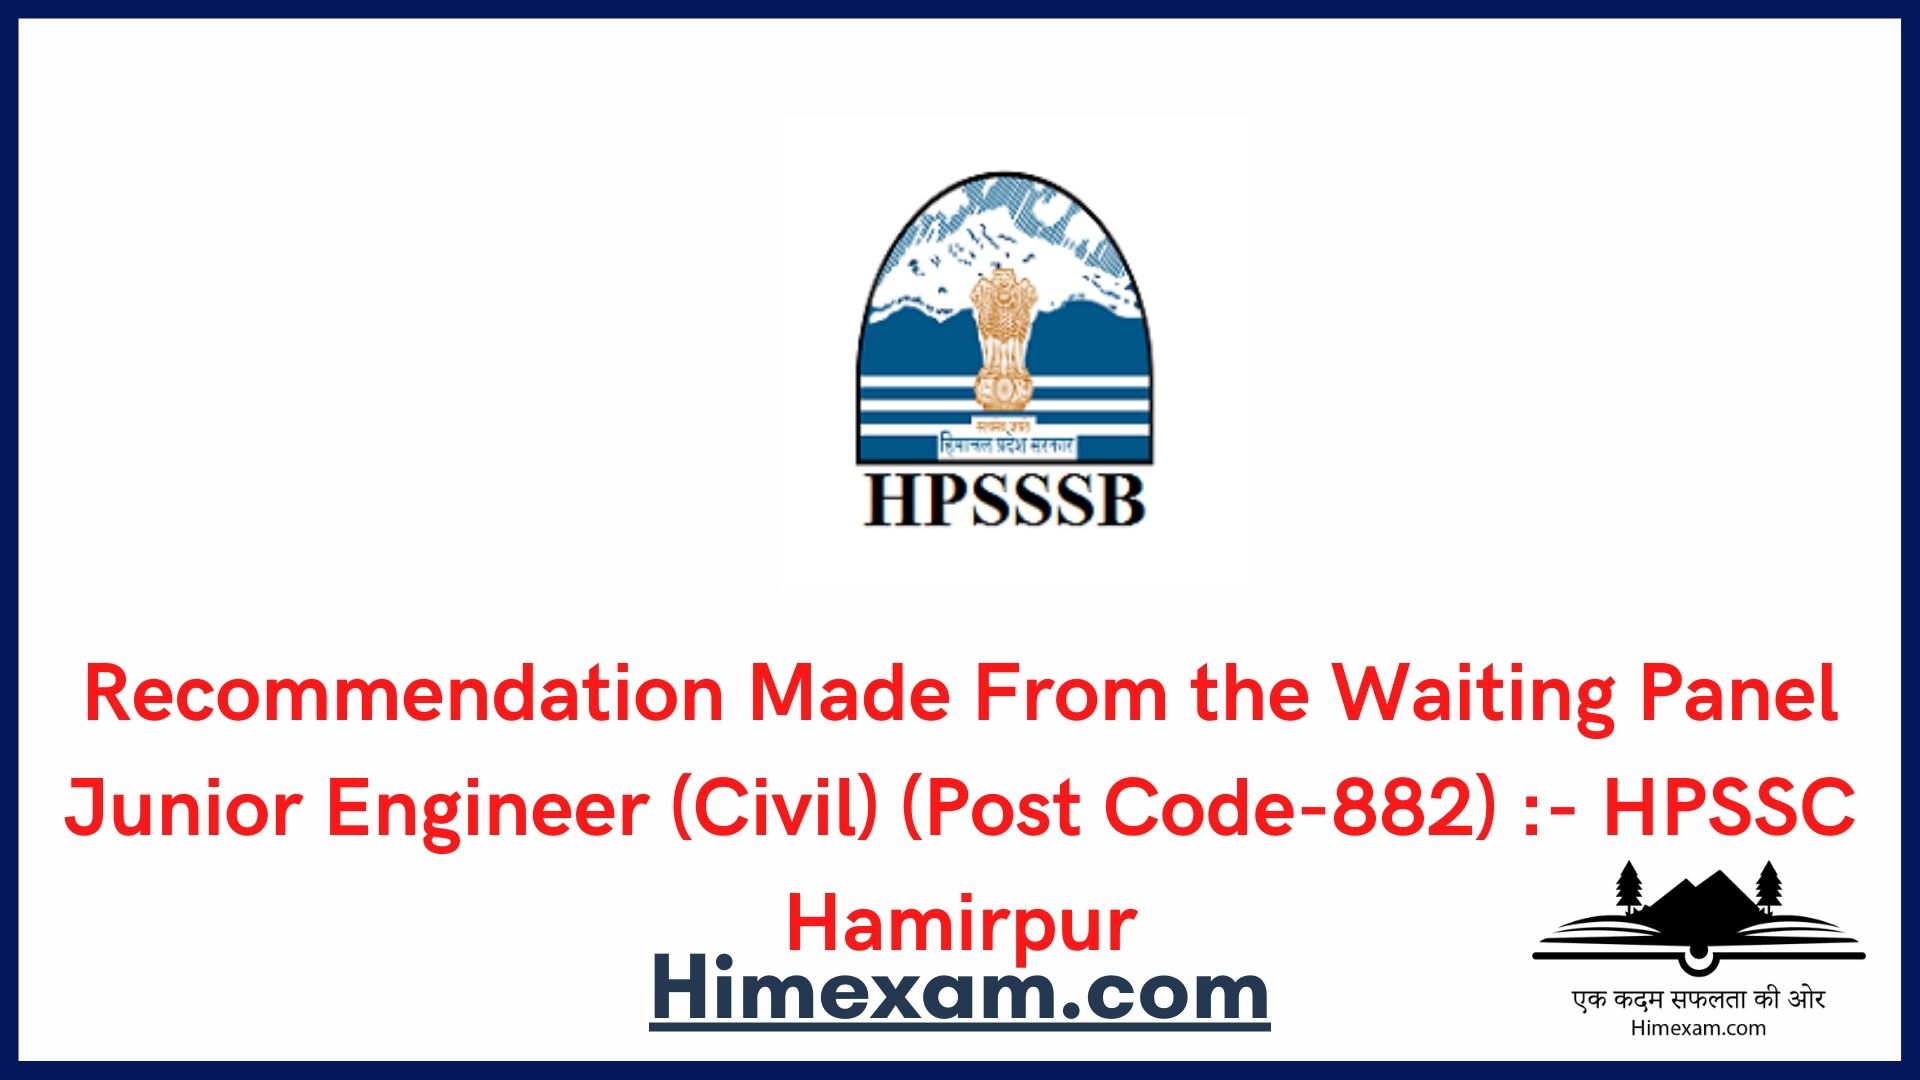 Recommendation Made From the Waiting Panel Junior Engineer (Civil) (Post Code-882) :- HPSSC Hamirpur